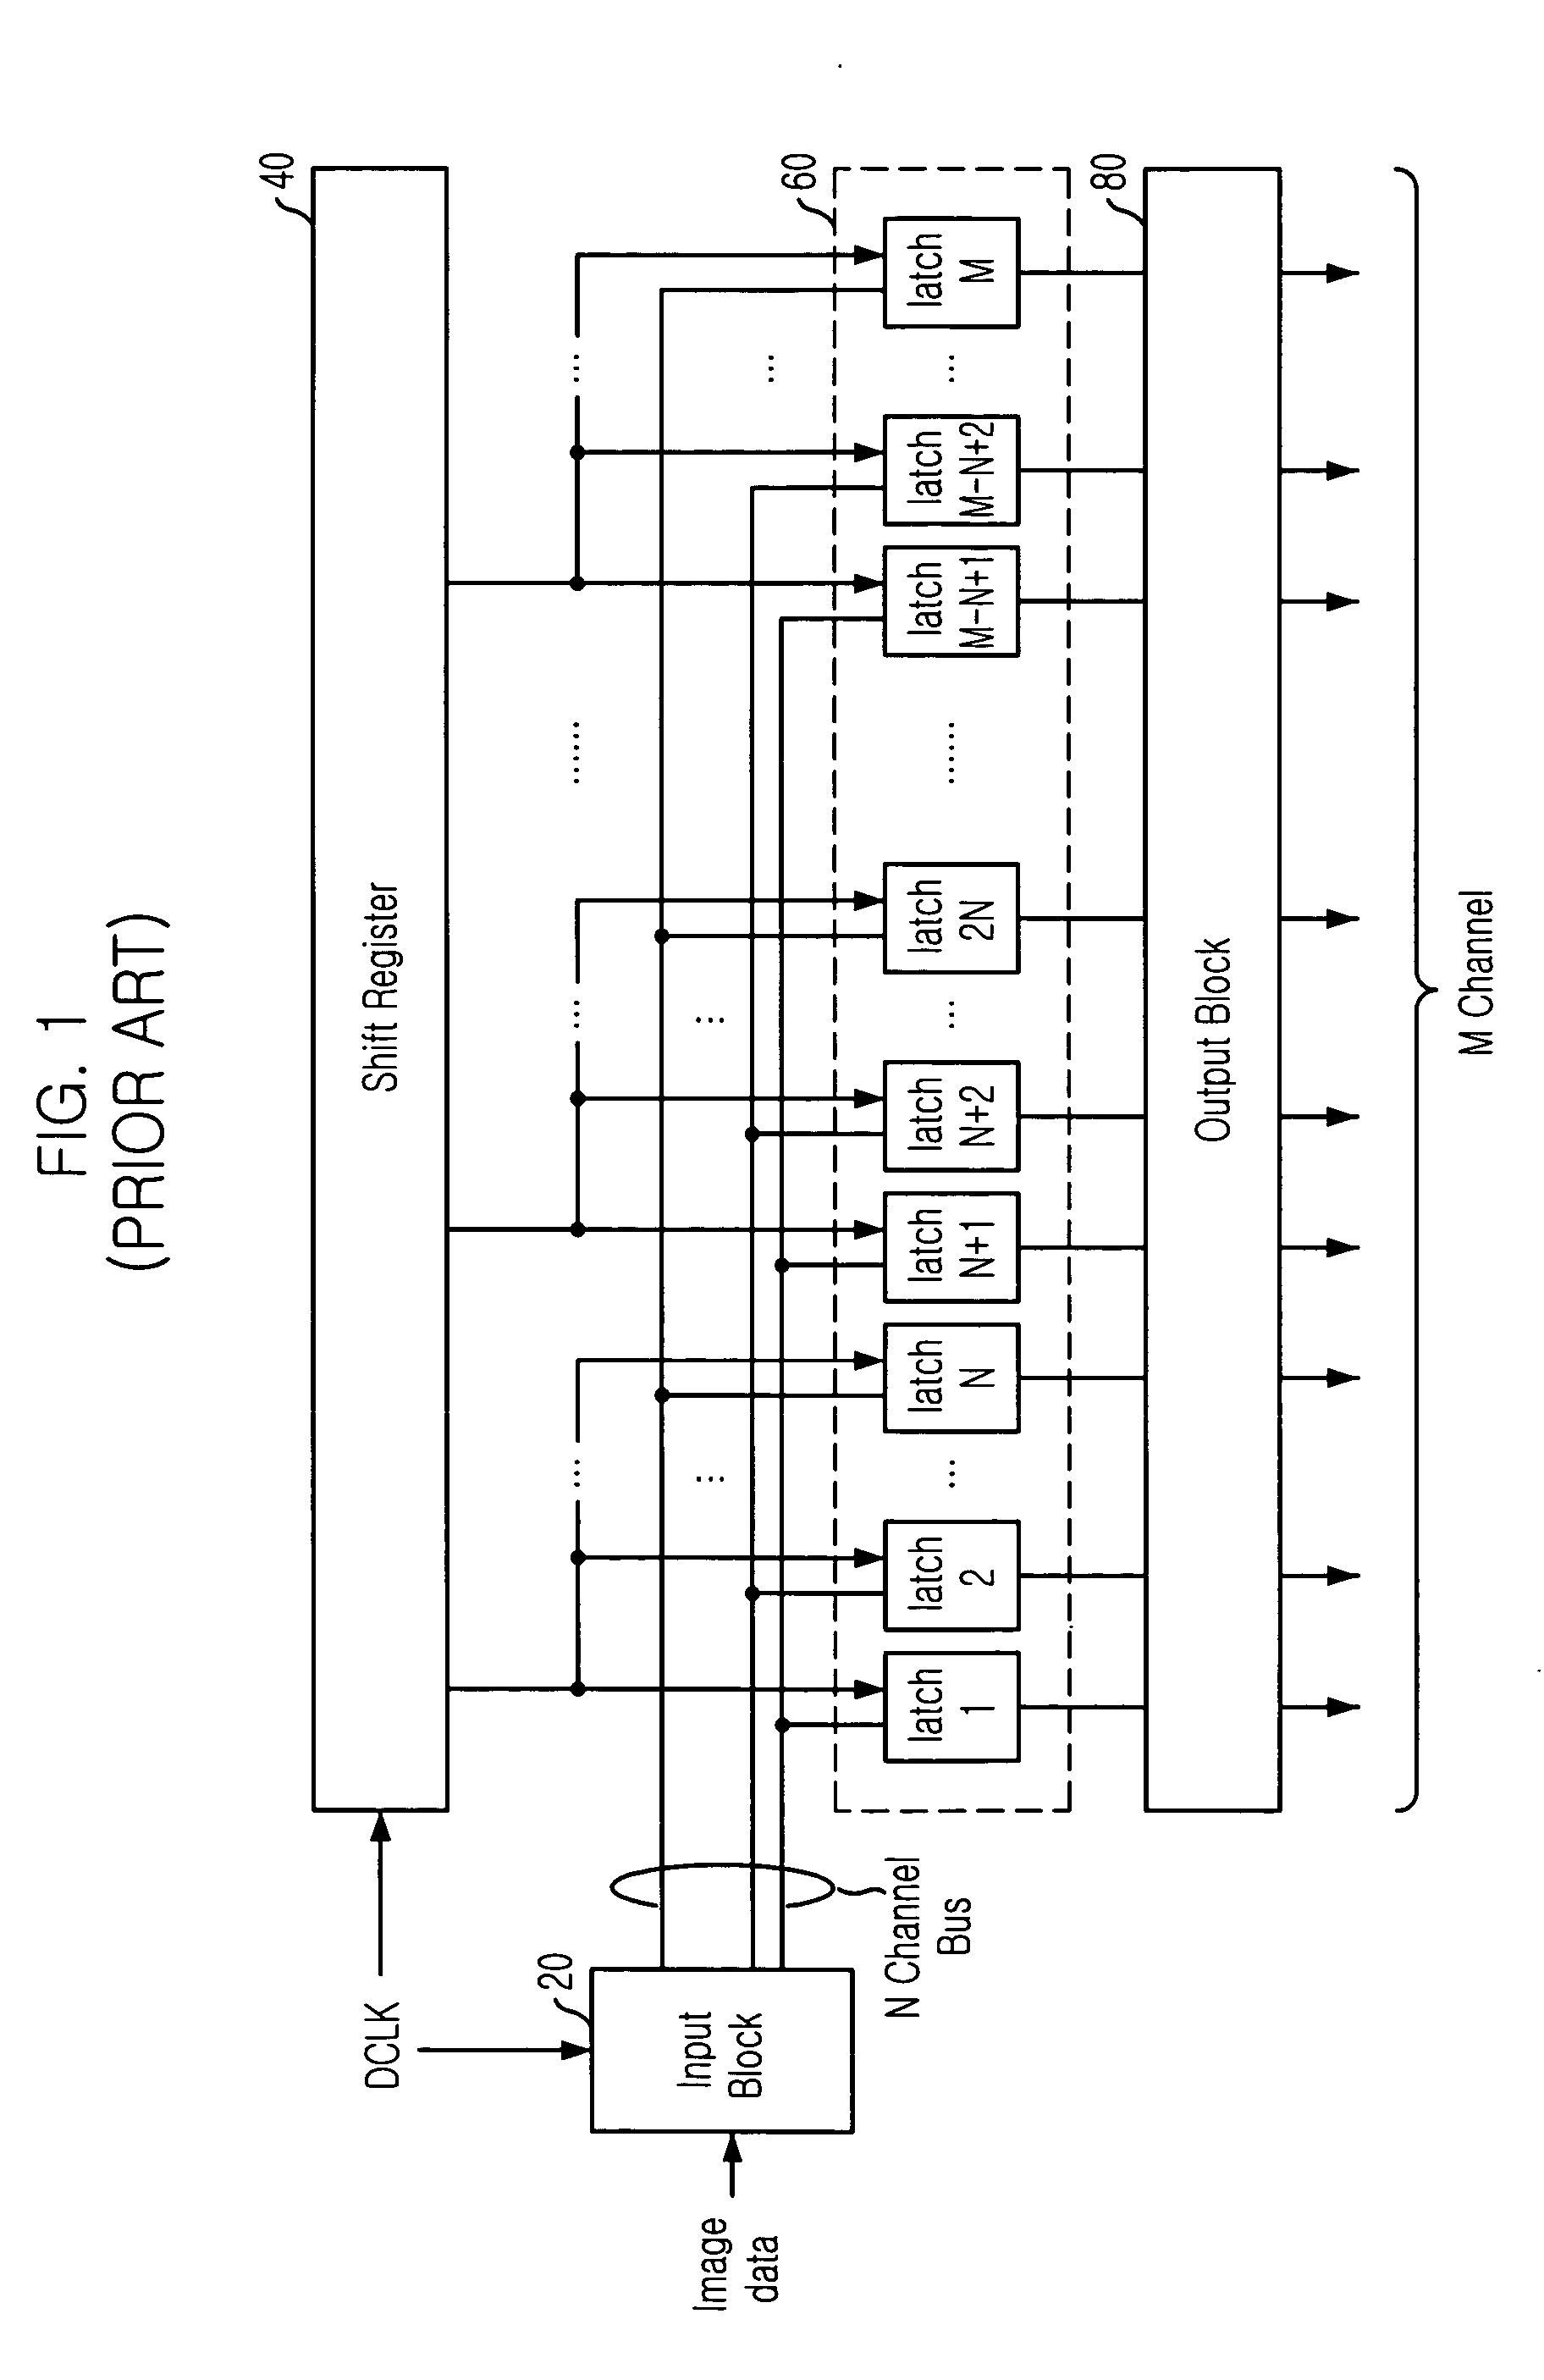 Source driver and its compression and transmission method